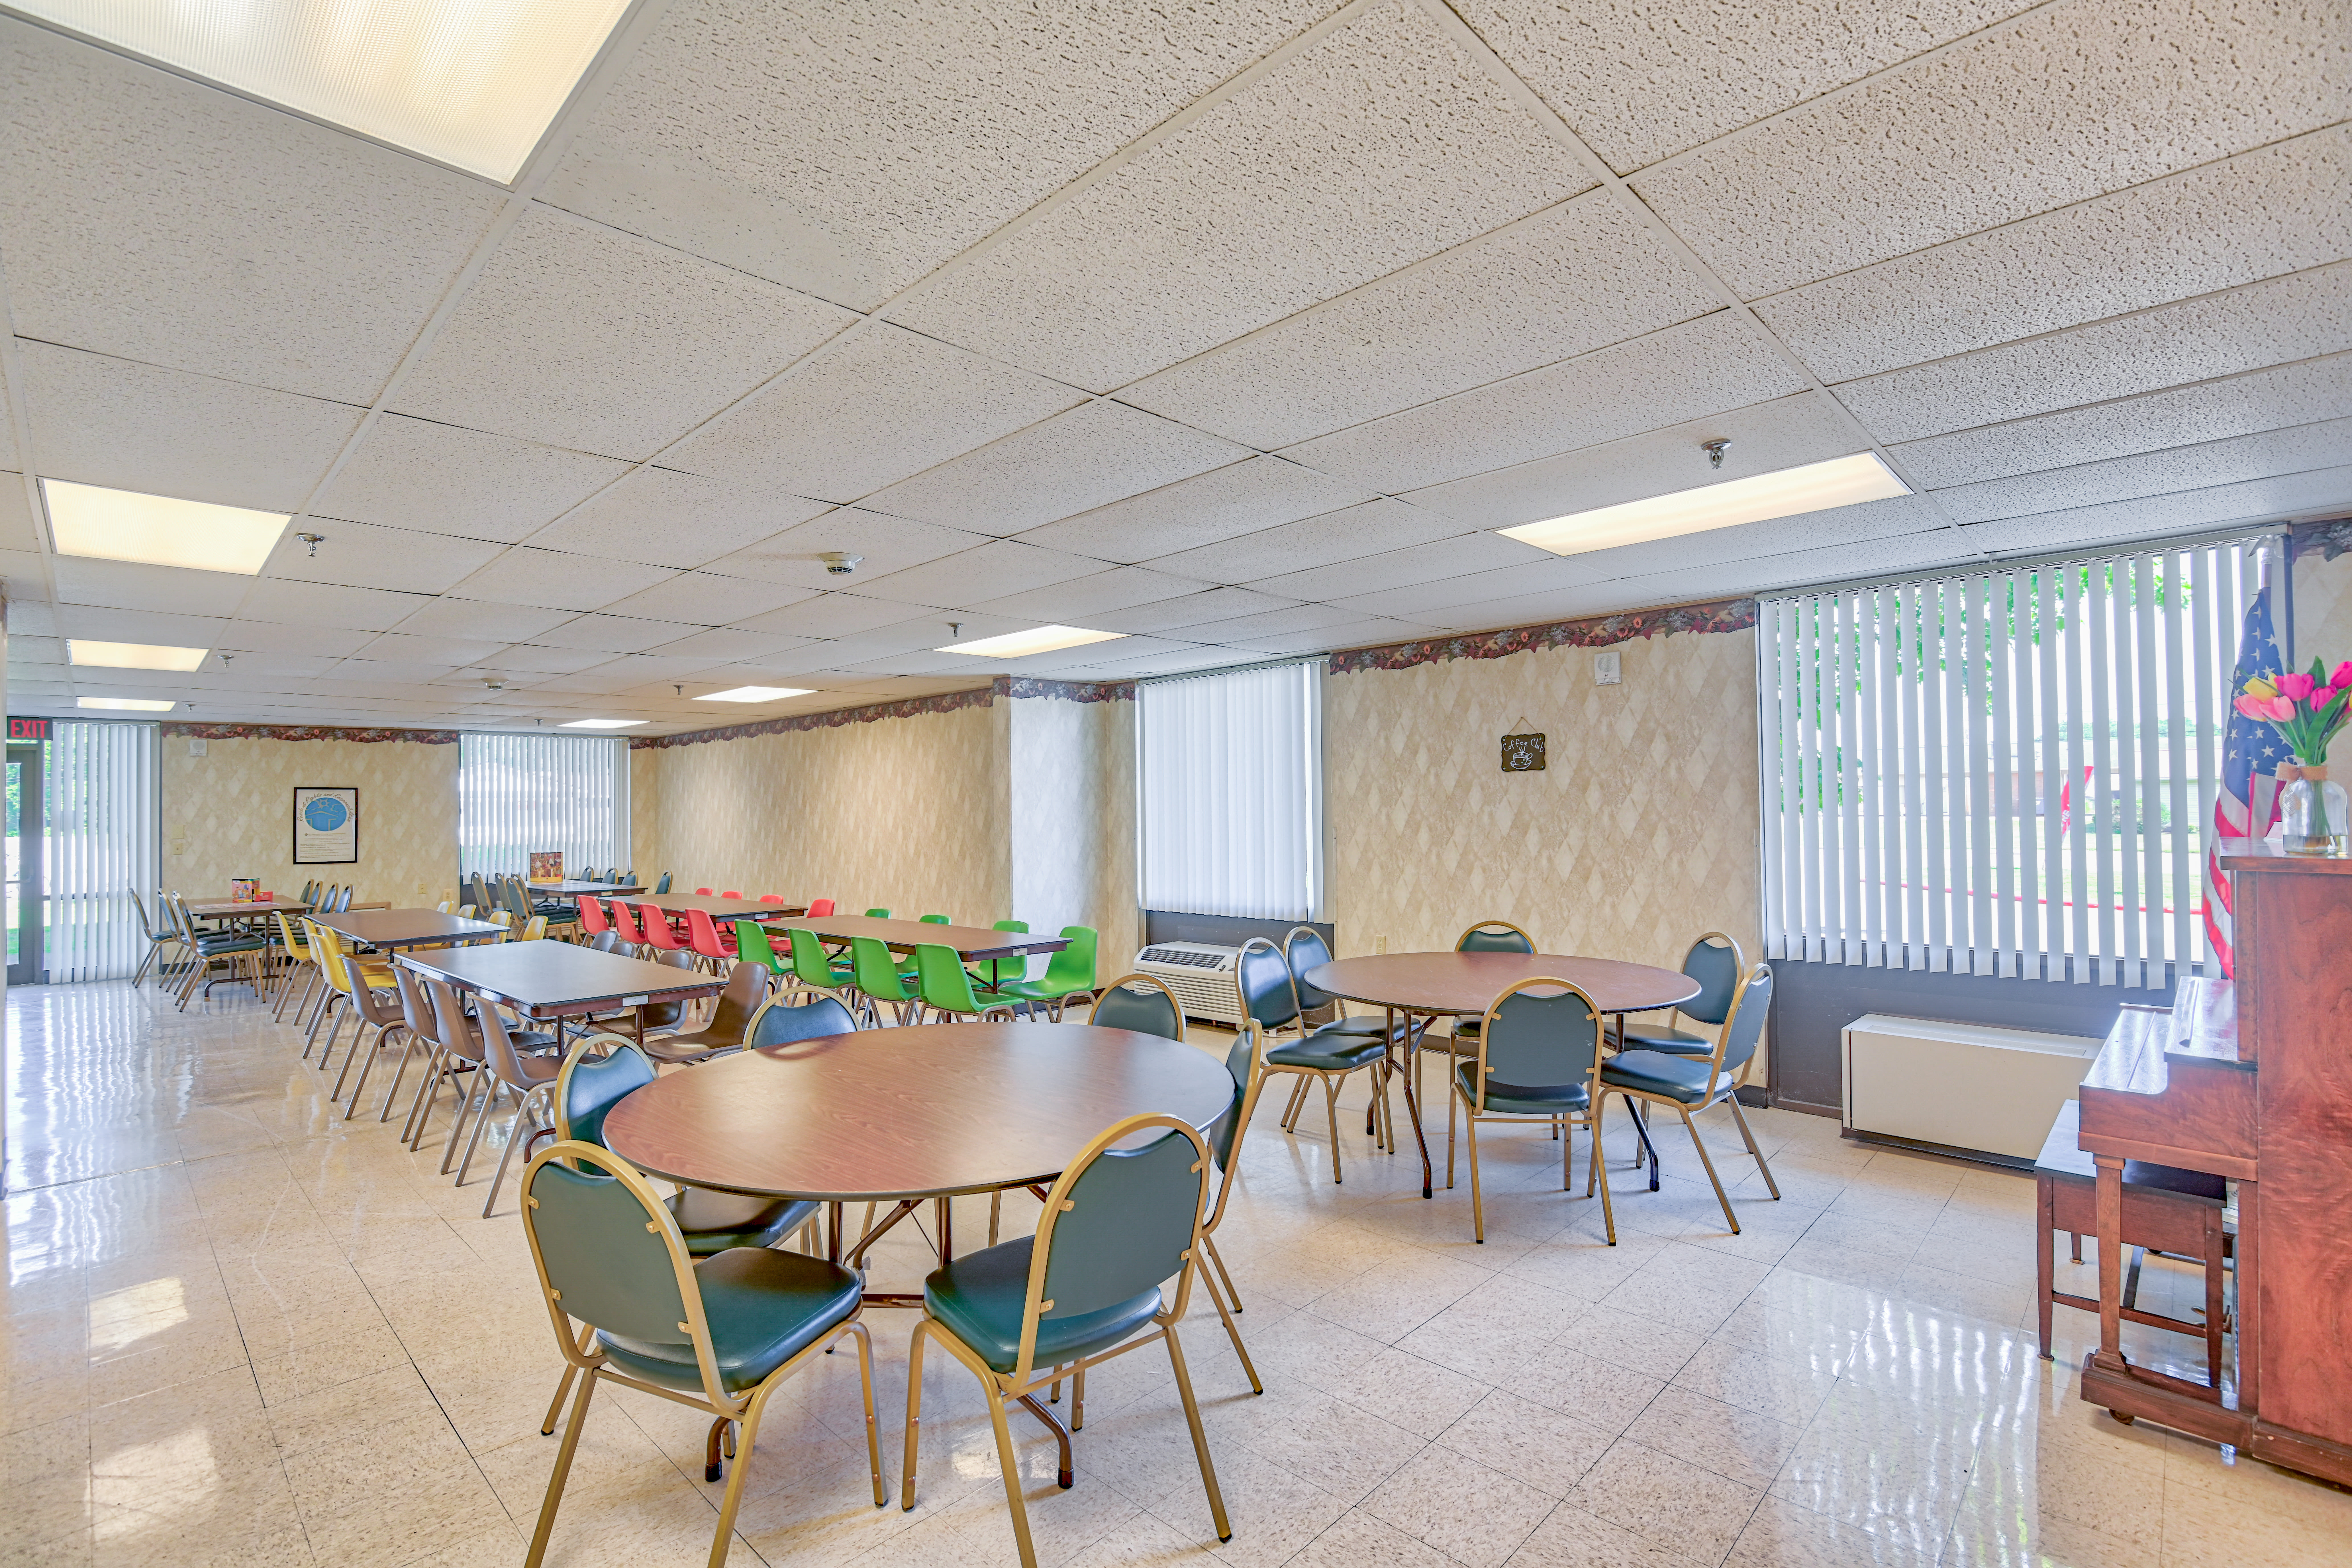 Dinning hall at Riverside Towers in Coshocton, Ohio